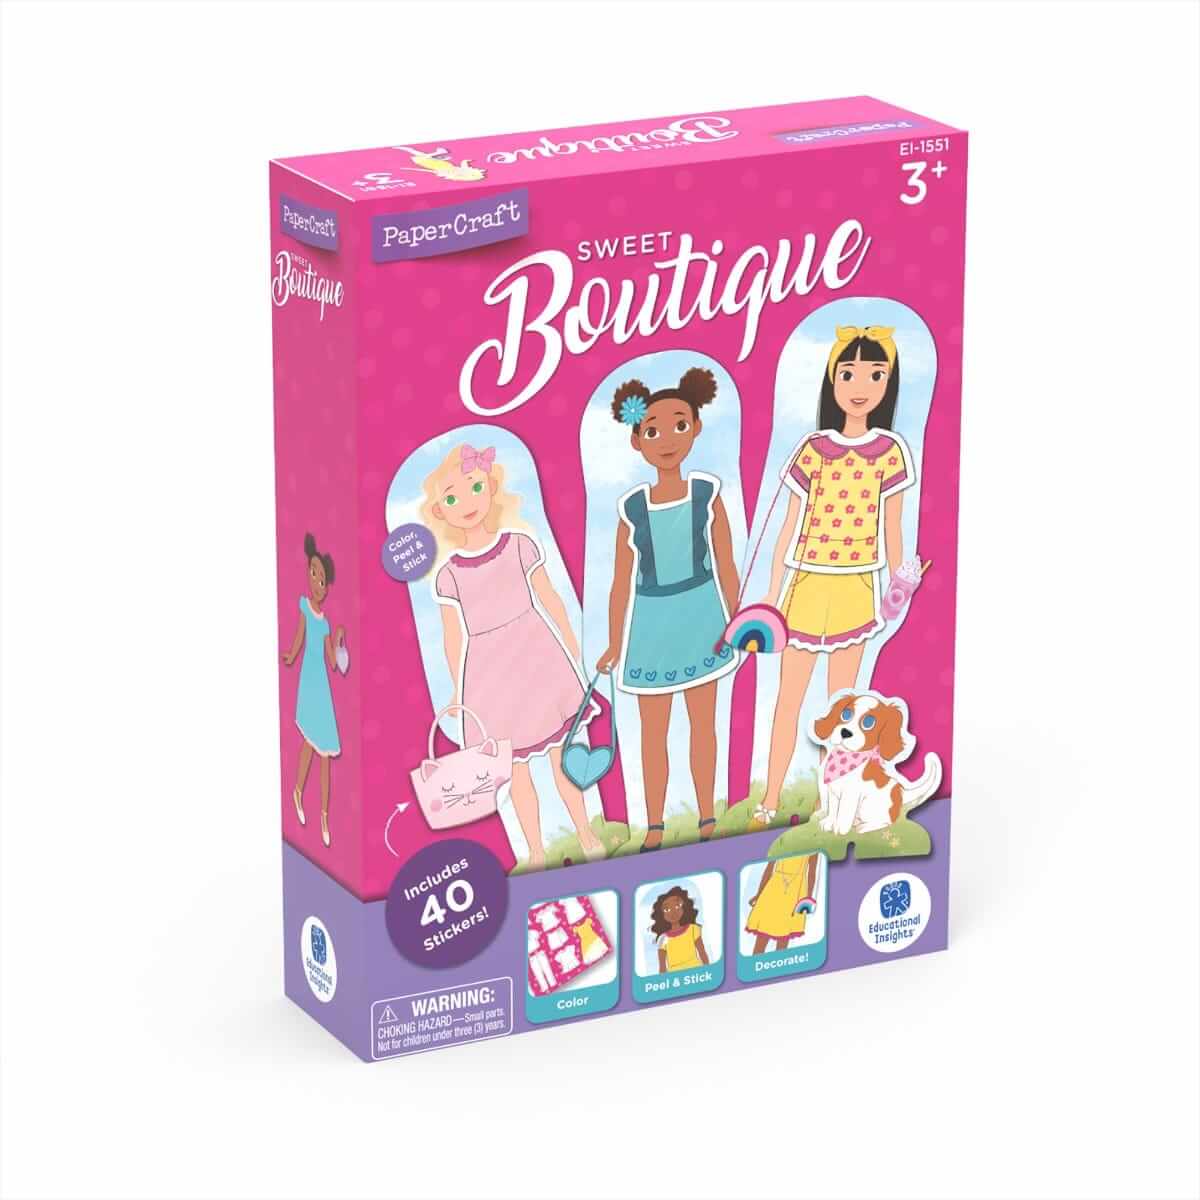 Papercraft Sweet Boutique